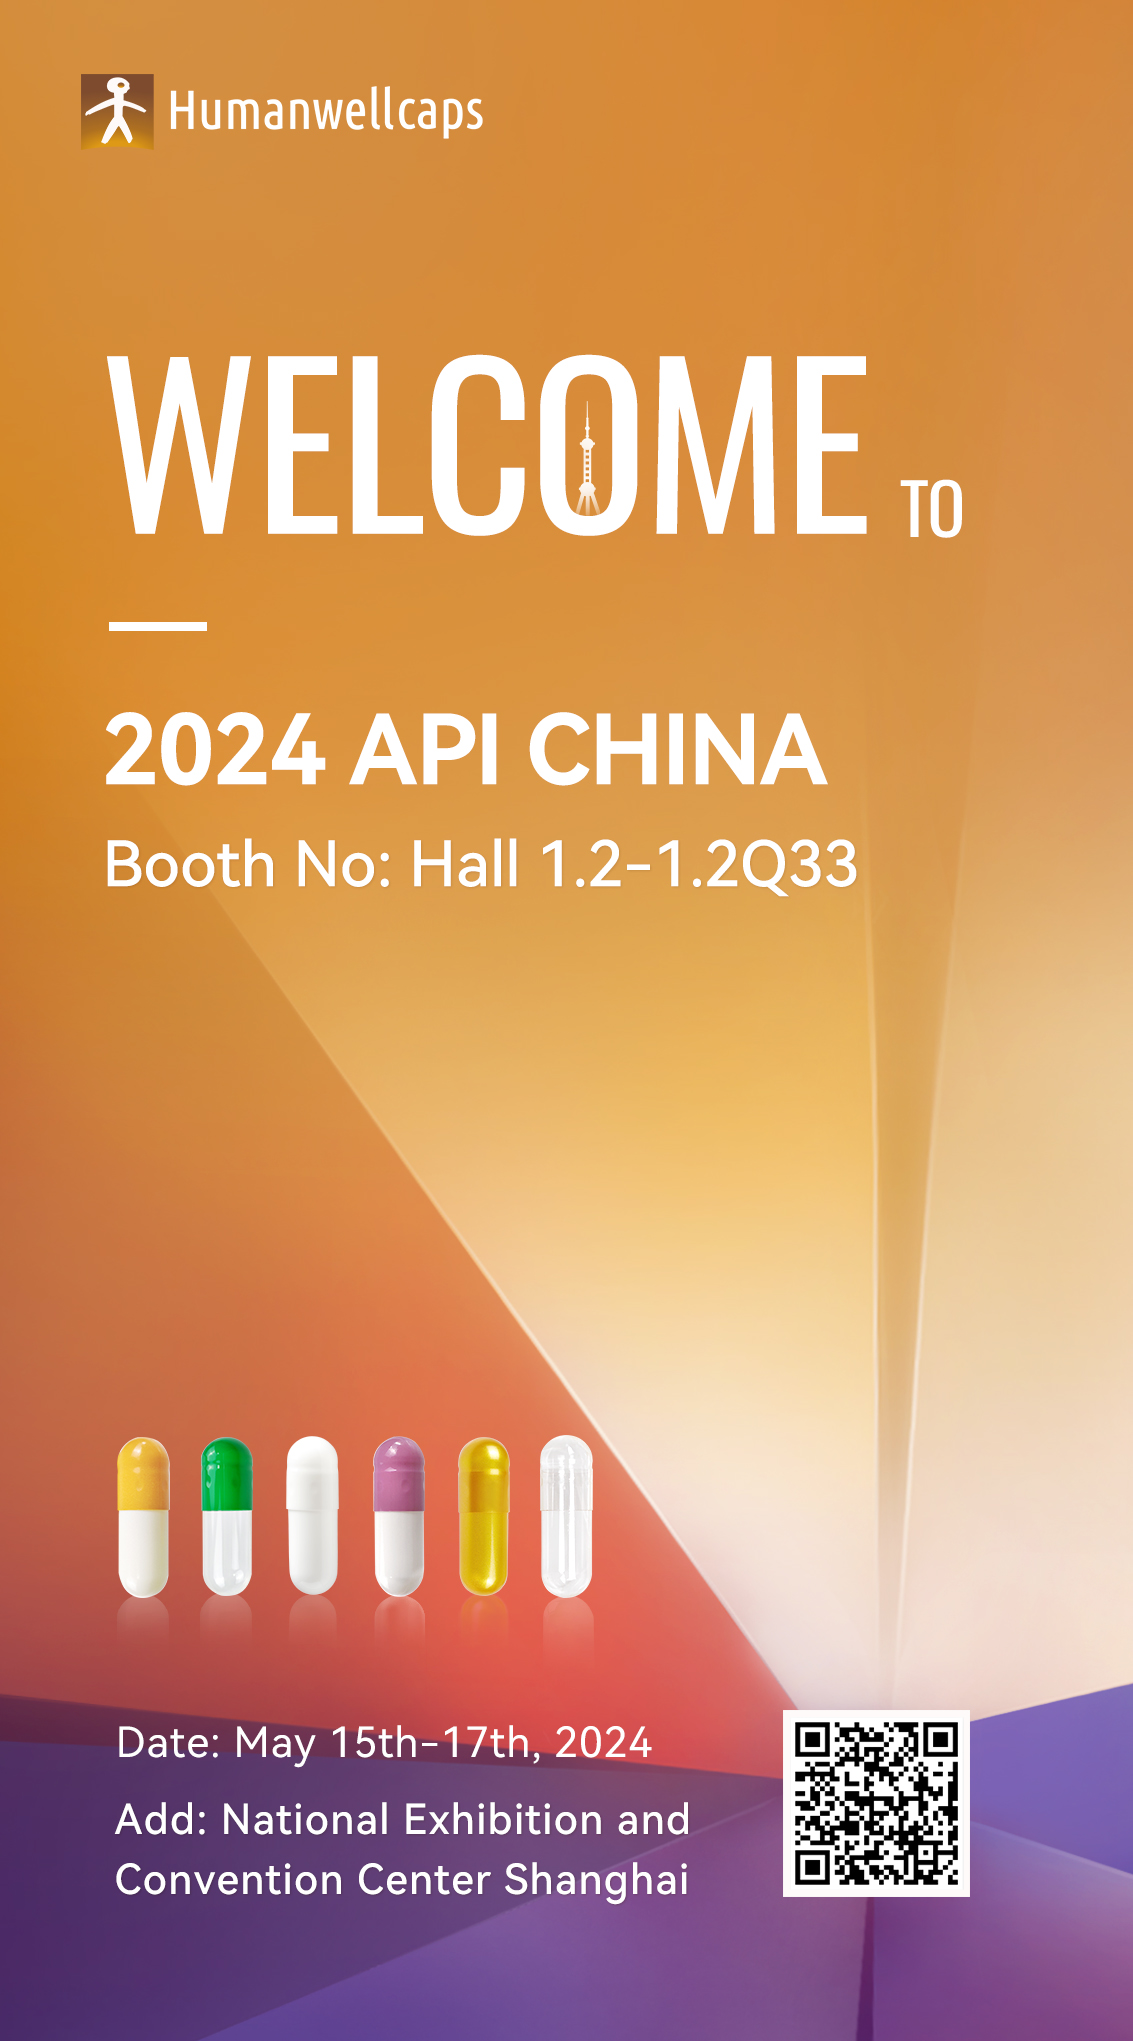  Invitation for the 2024 API China on May 15th-17th, 2024!